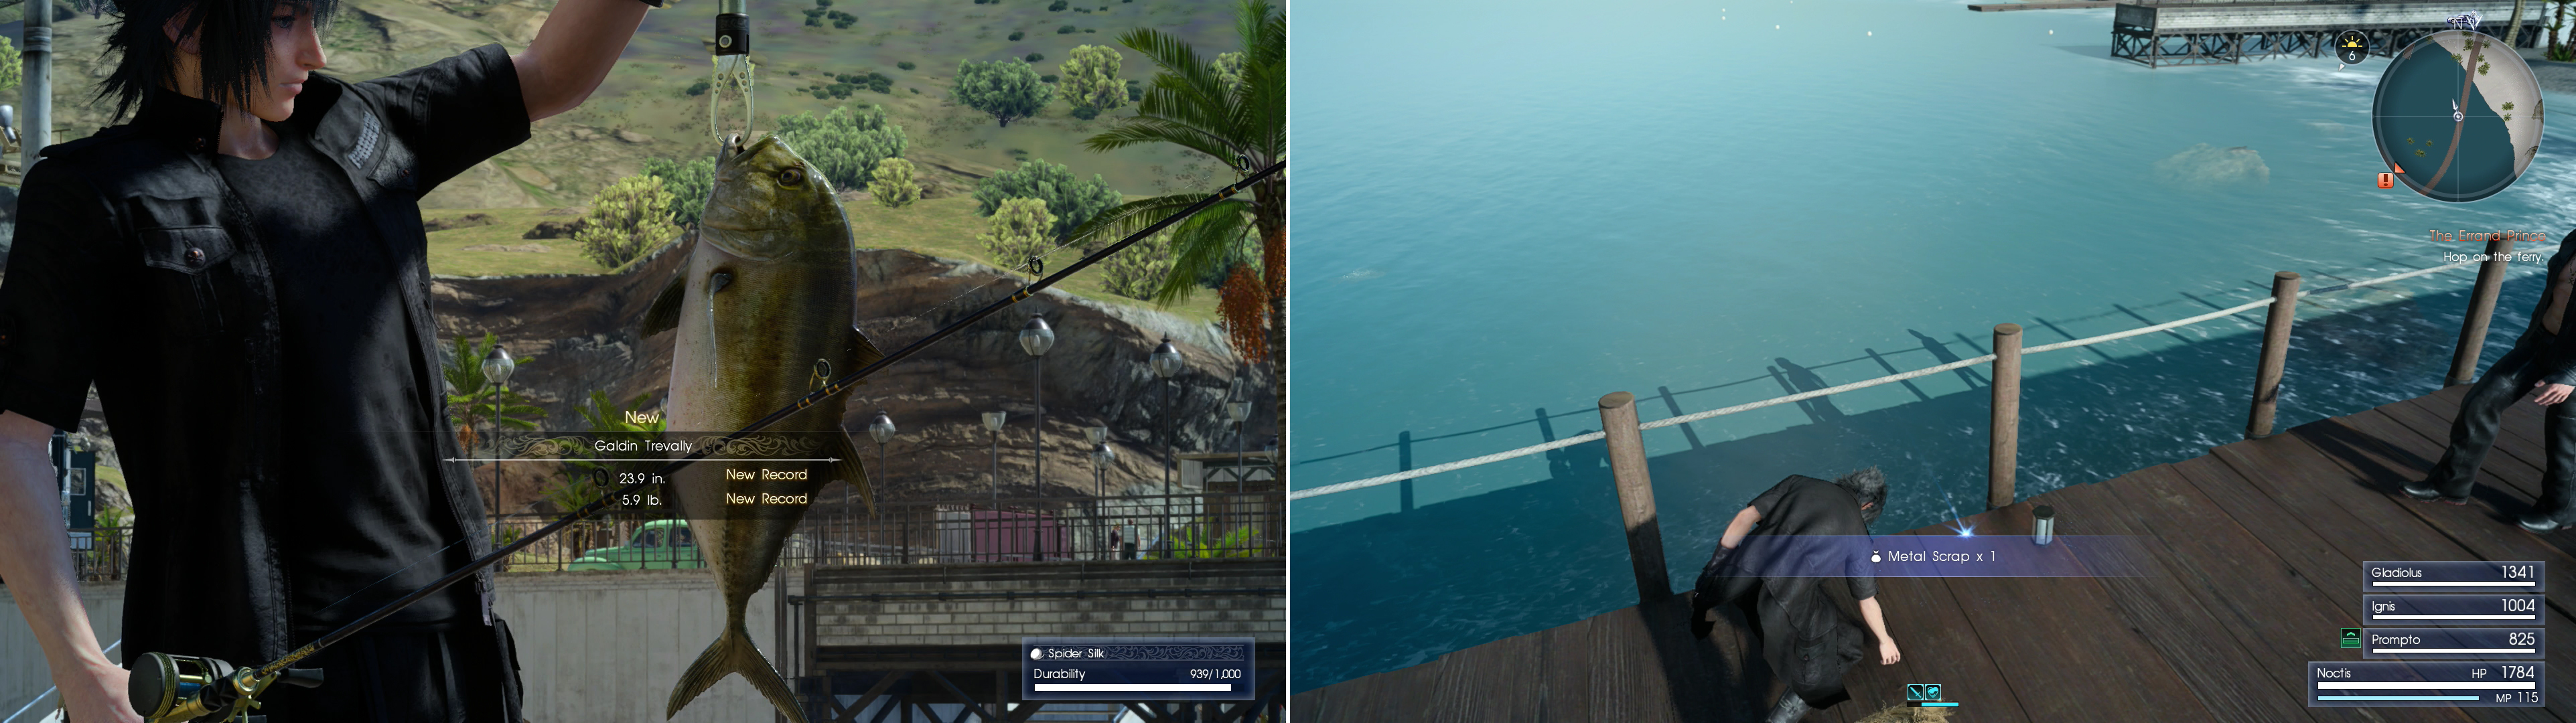 If you want to be ahead of the game, go fishing for some Trevally (left). On the pier you’ll find a Metal Scrap, which will be useful for a weapon upgrade later (right).